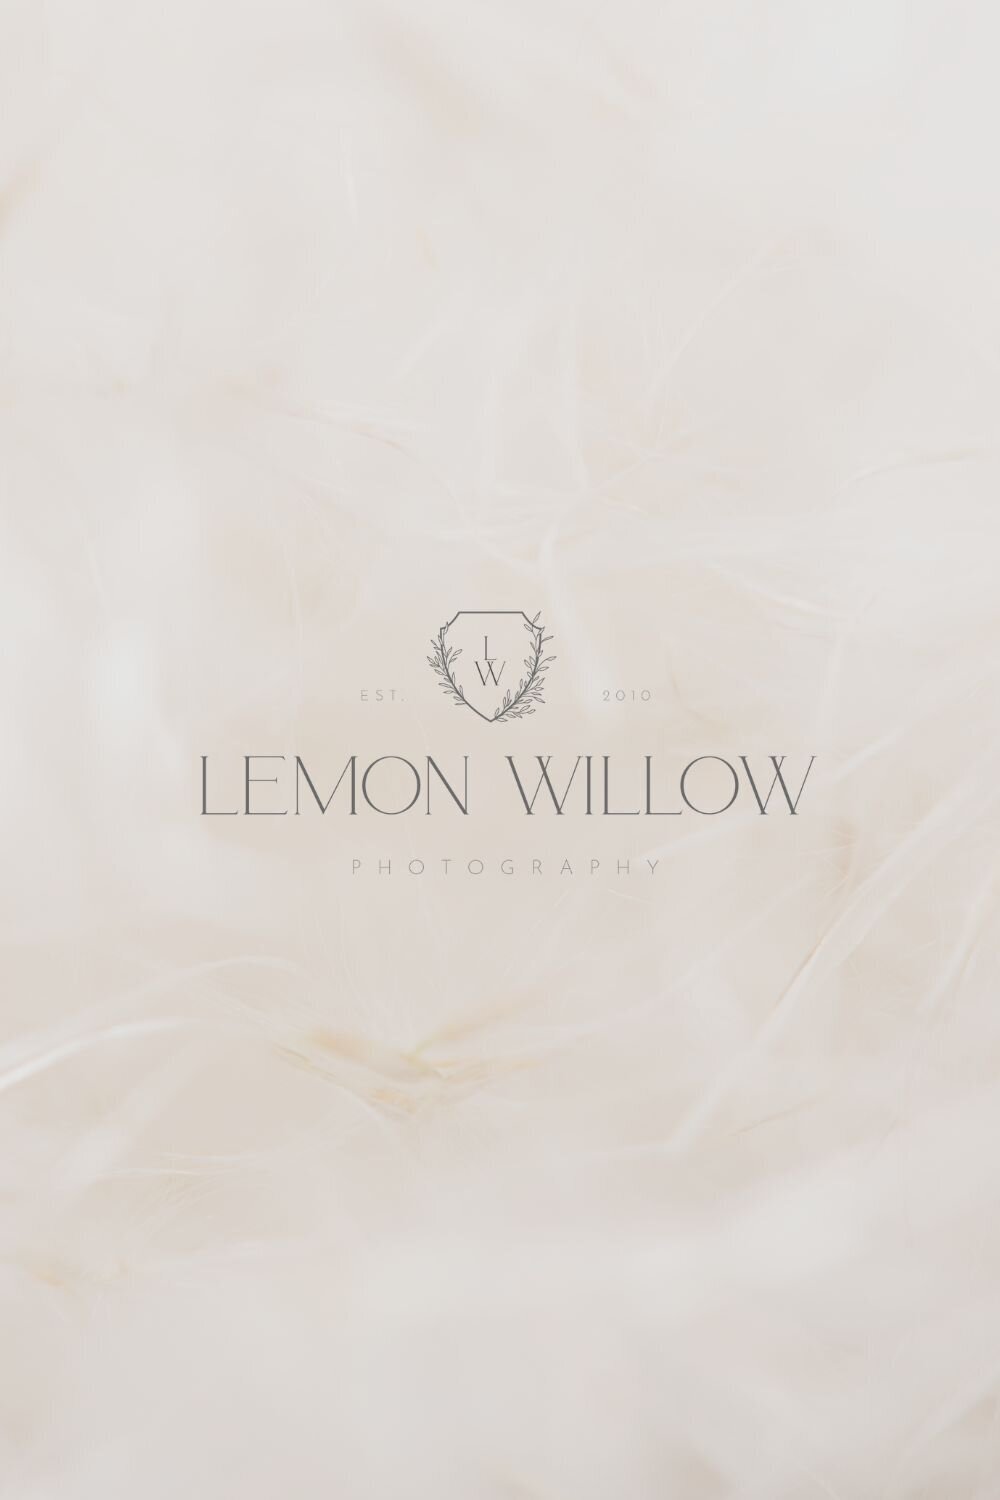 Branding for photographers that needs a modern and sophisticated brand. With a beige and earthy color palette it works for both wedding and family photographers